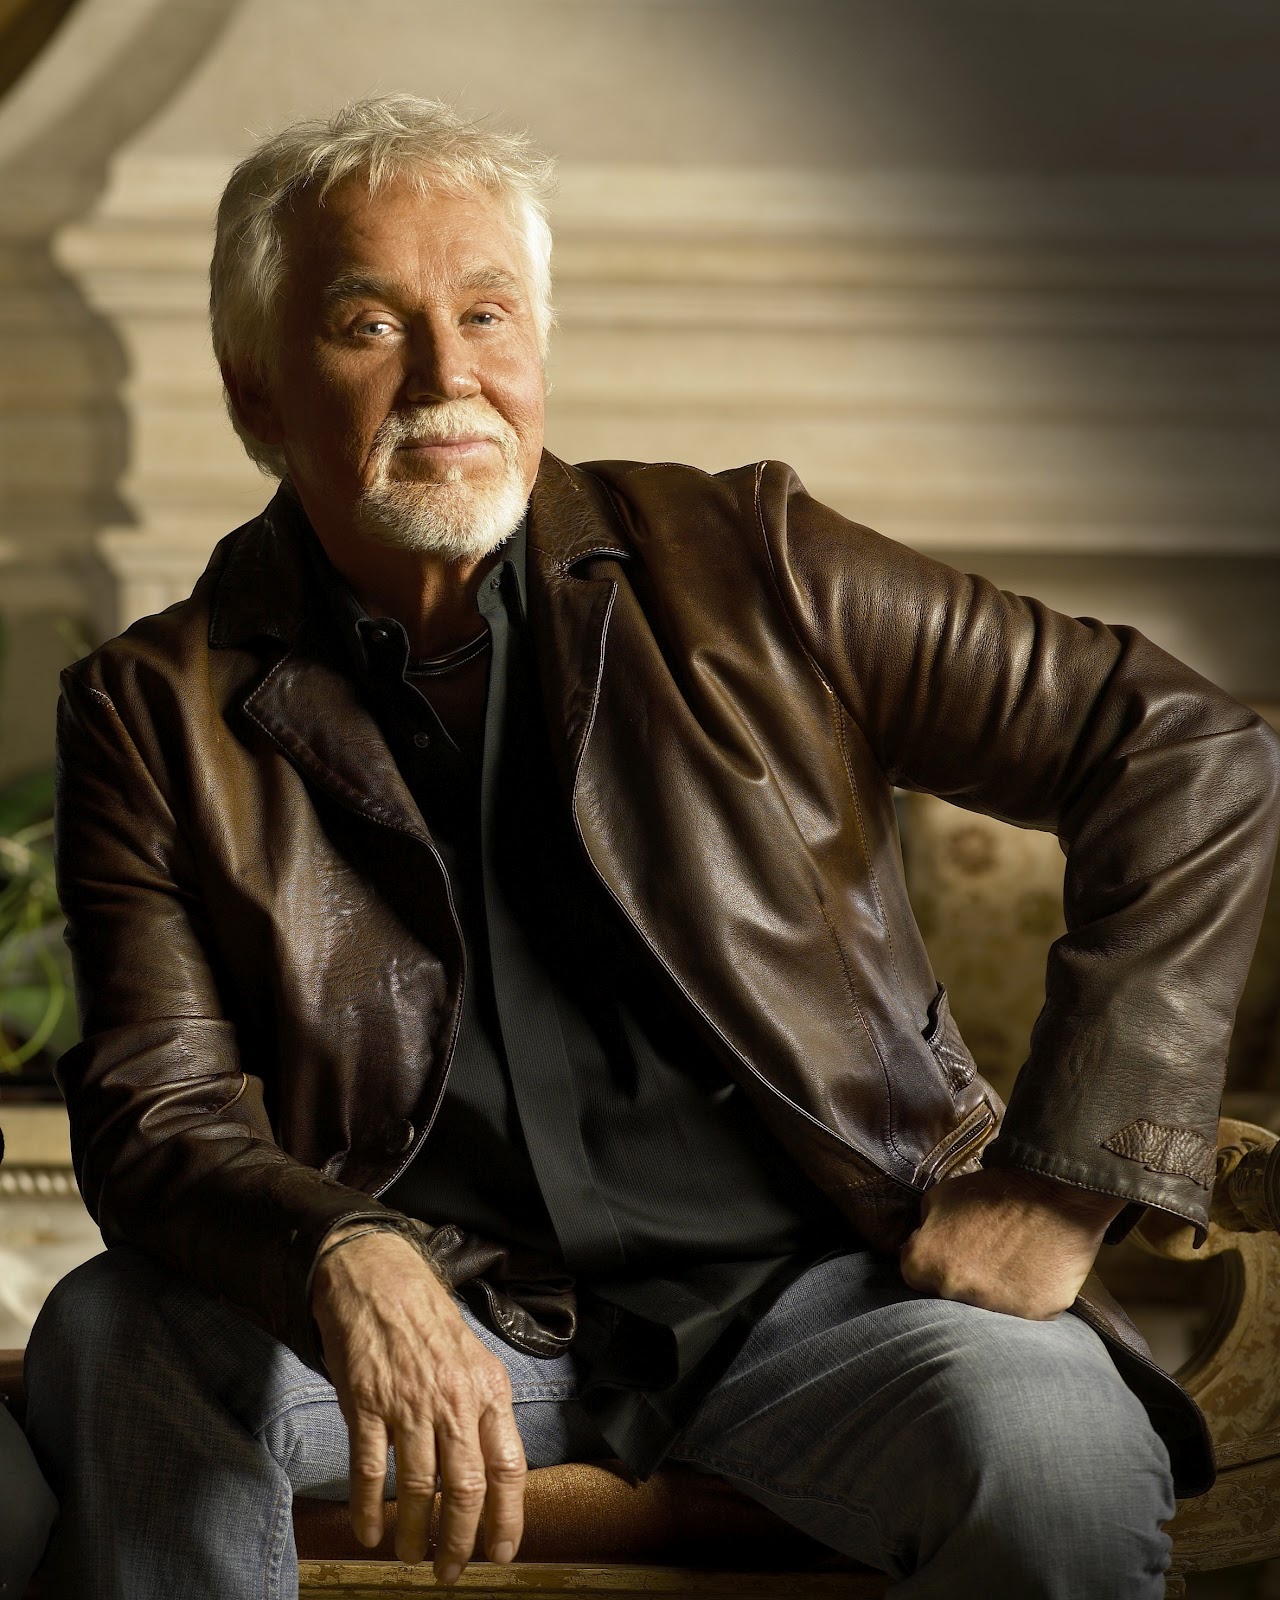 Chatter Busy Kenny Rogers Bad Plastic Surgery